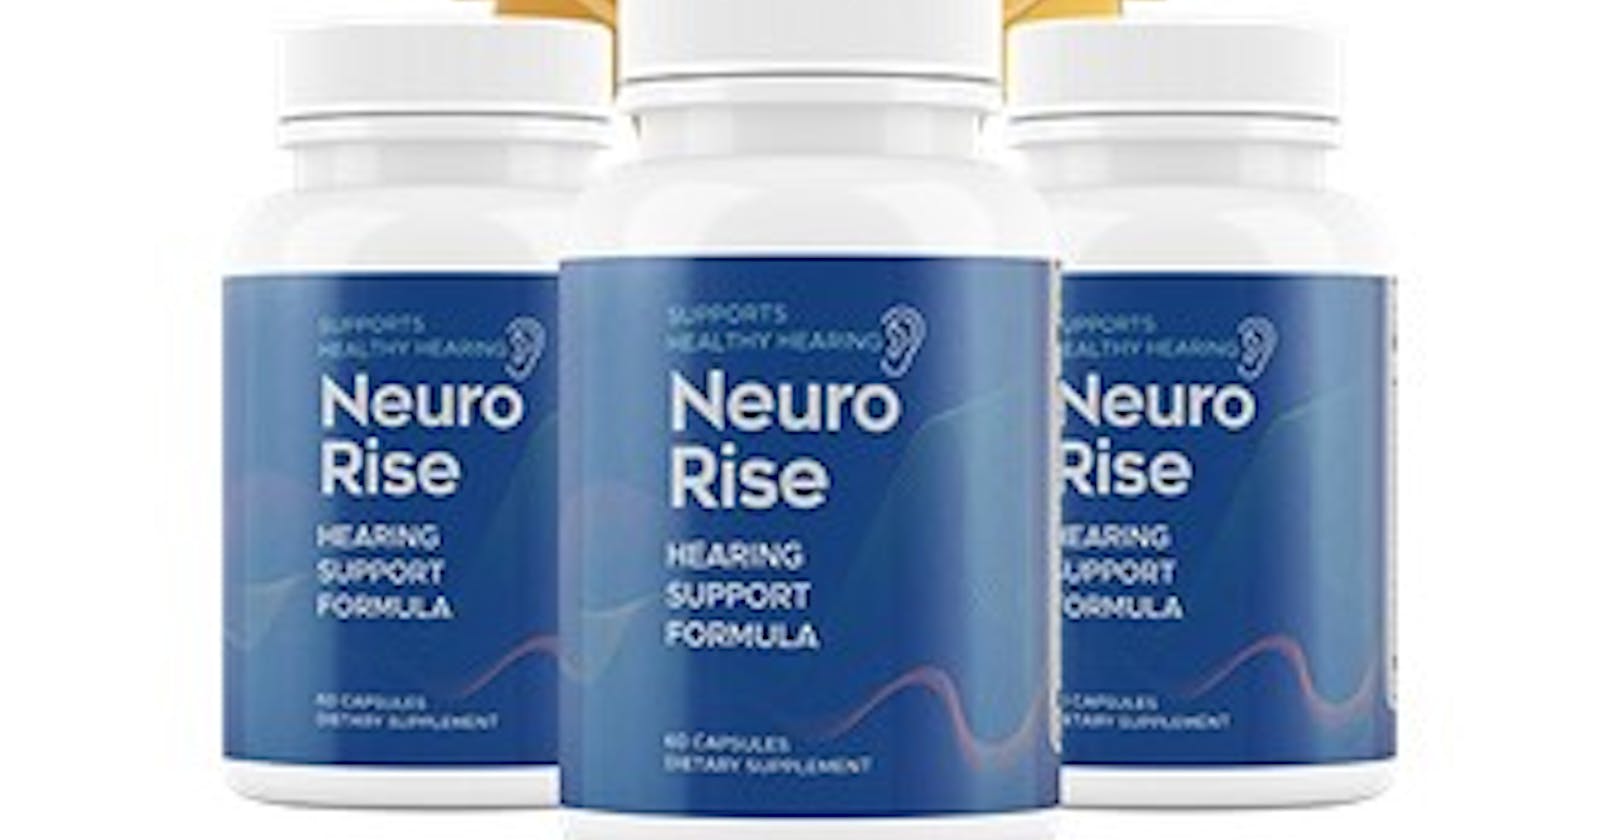 NeuroRise Hearing Support Formula Reviews * LEGIT 2023* Its Really Works?